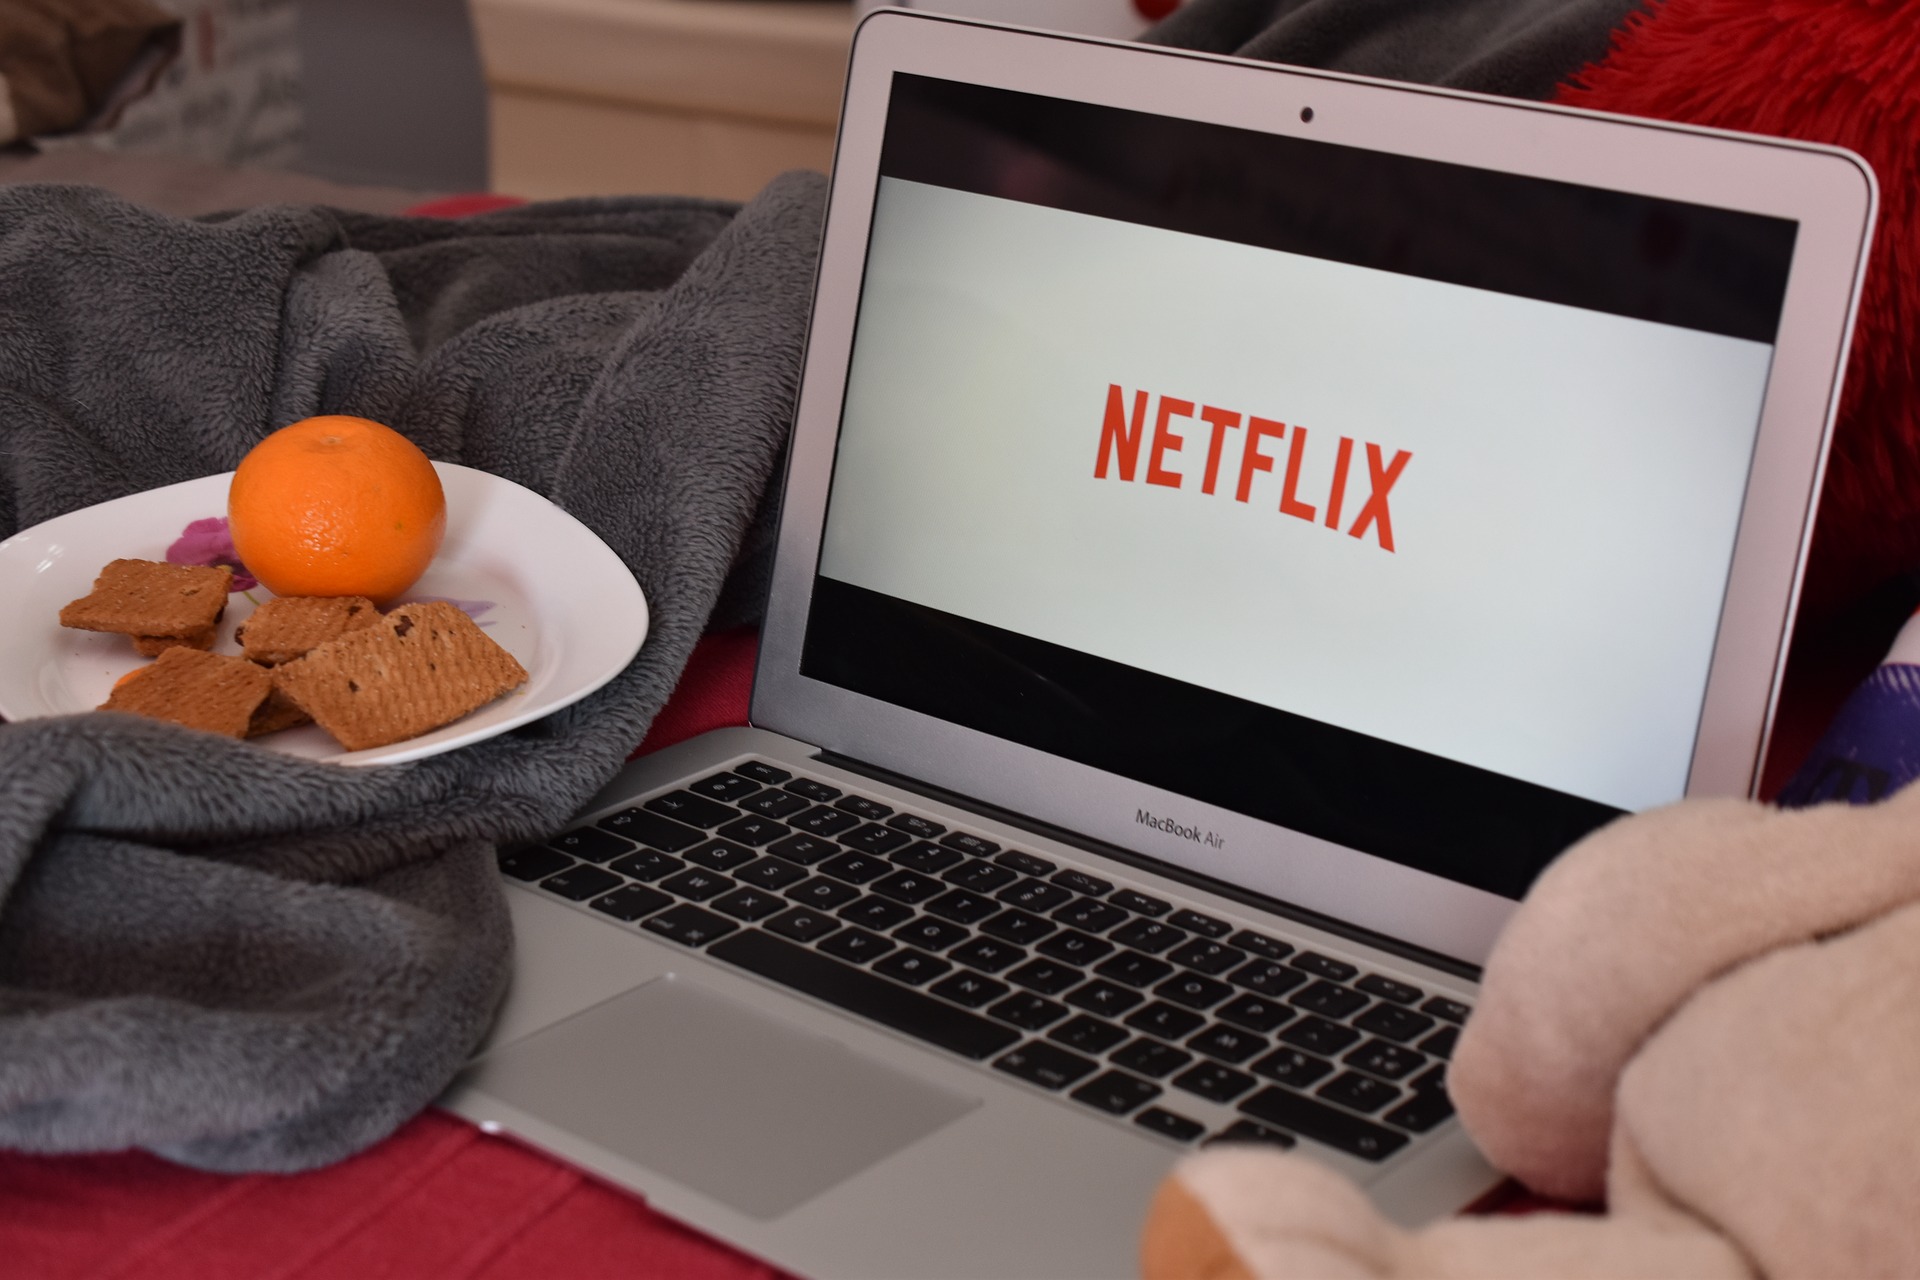 Best Shows to Watch on Netflix, best t.v shows to watch on netflix, top shows to watch on netflix, best shows to watch on netflix india, top 10 shows to watch on netflix